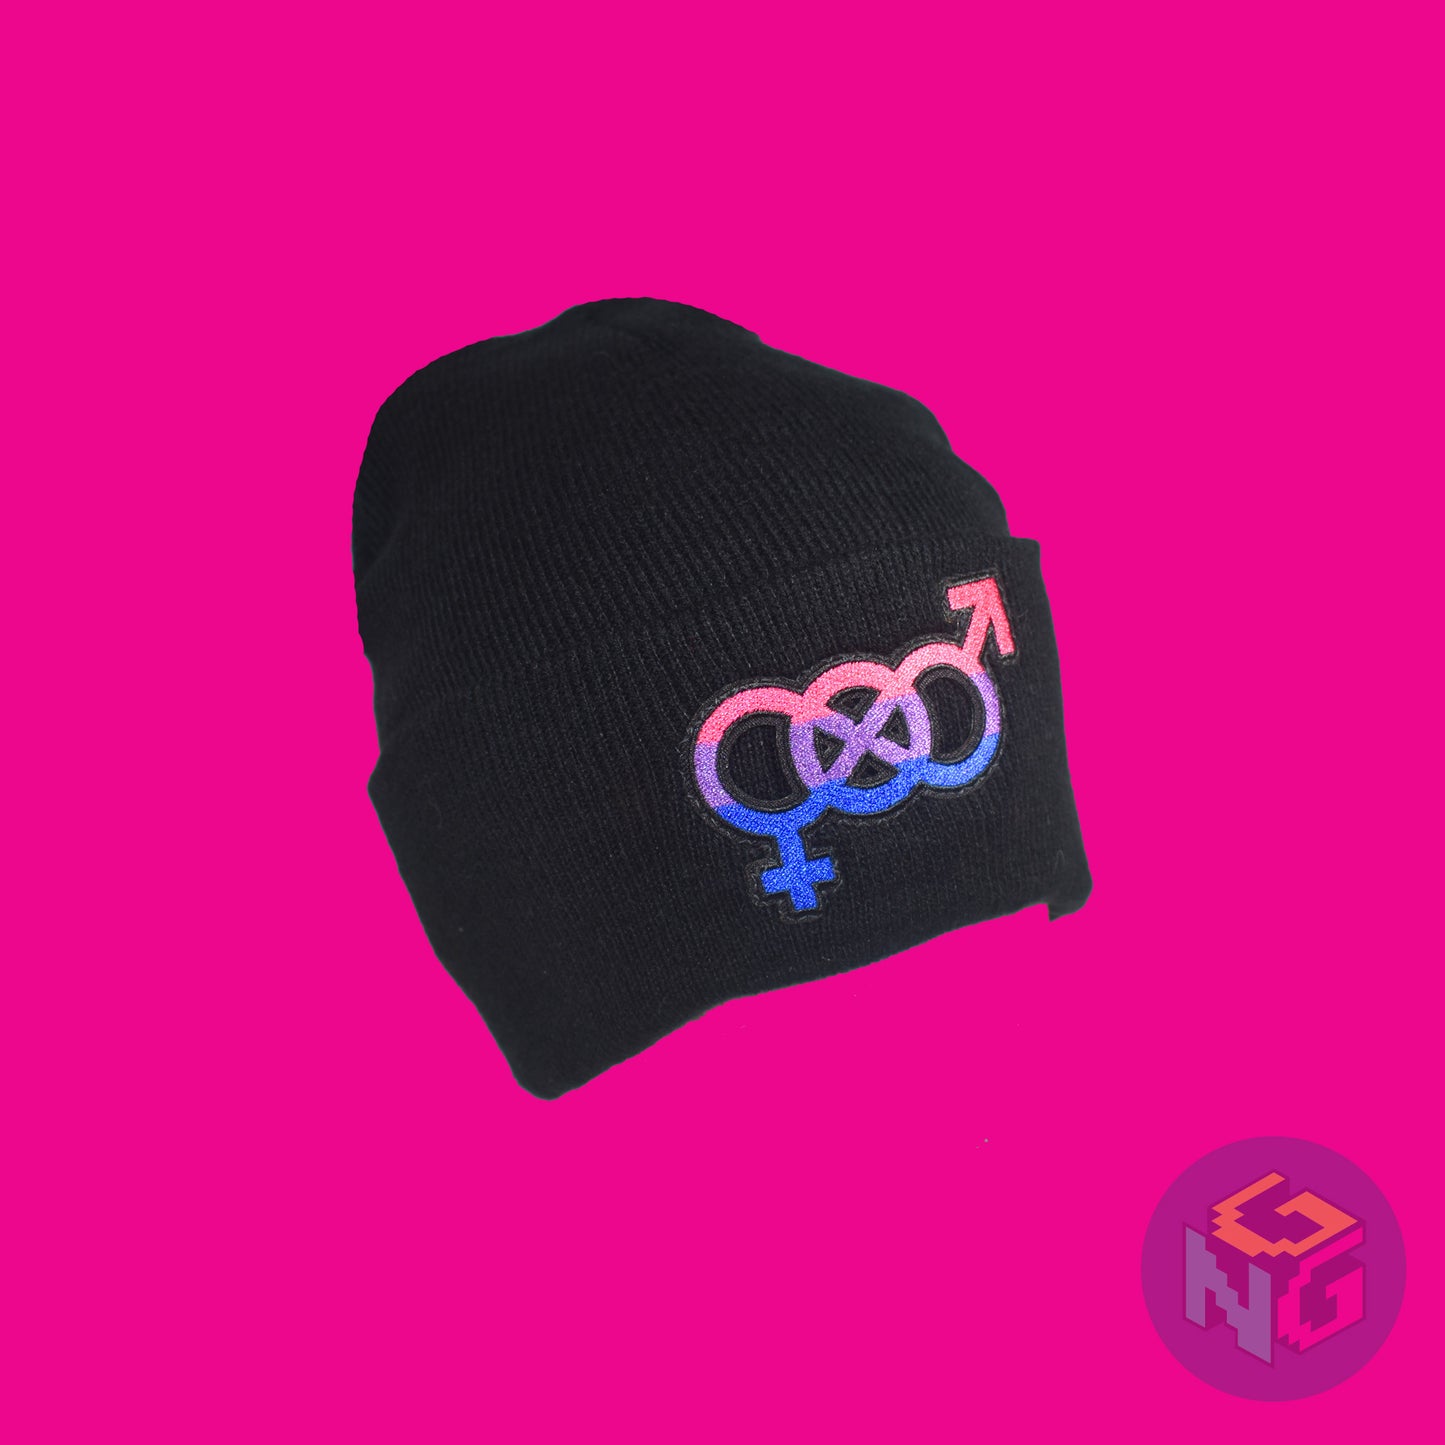 Black knit fabric beanie with the bisexual symbol in asexual pink, purple, and blue on the front. It is viewed from 3/4 and stretched on pink background